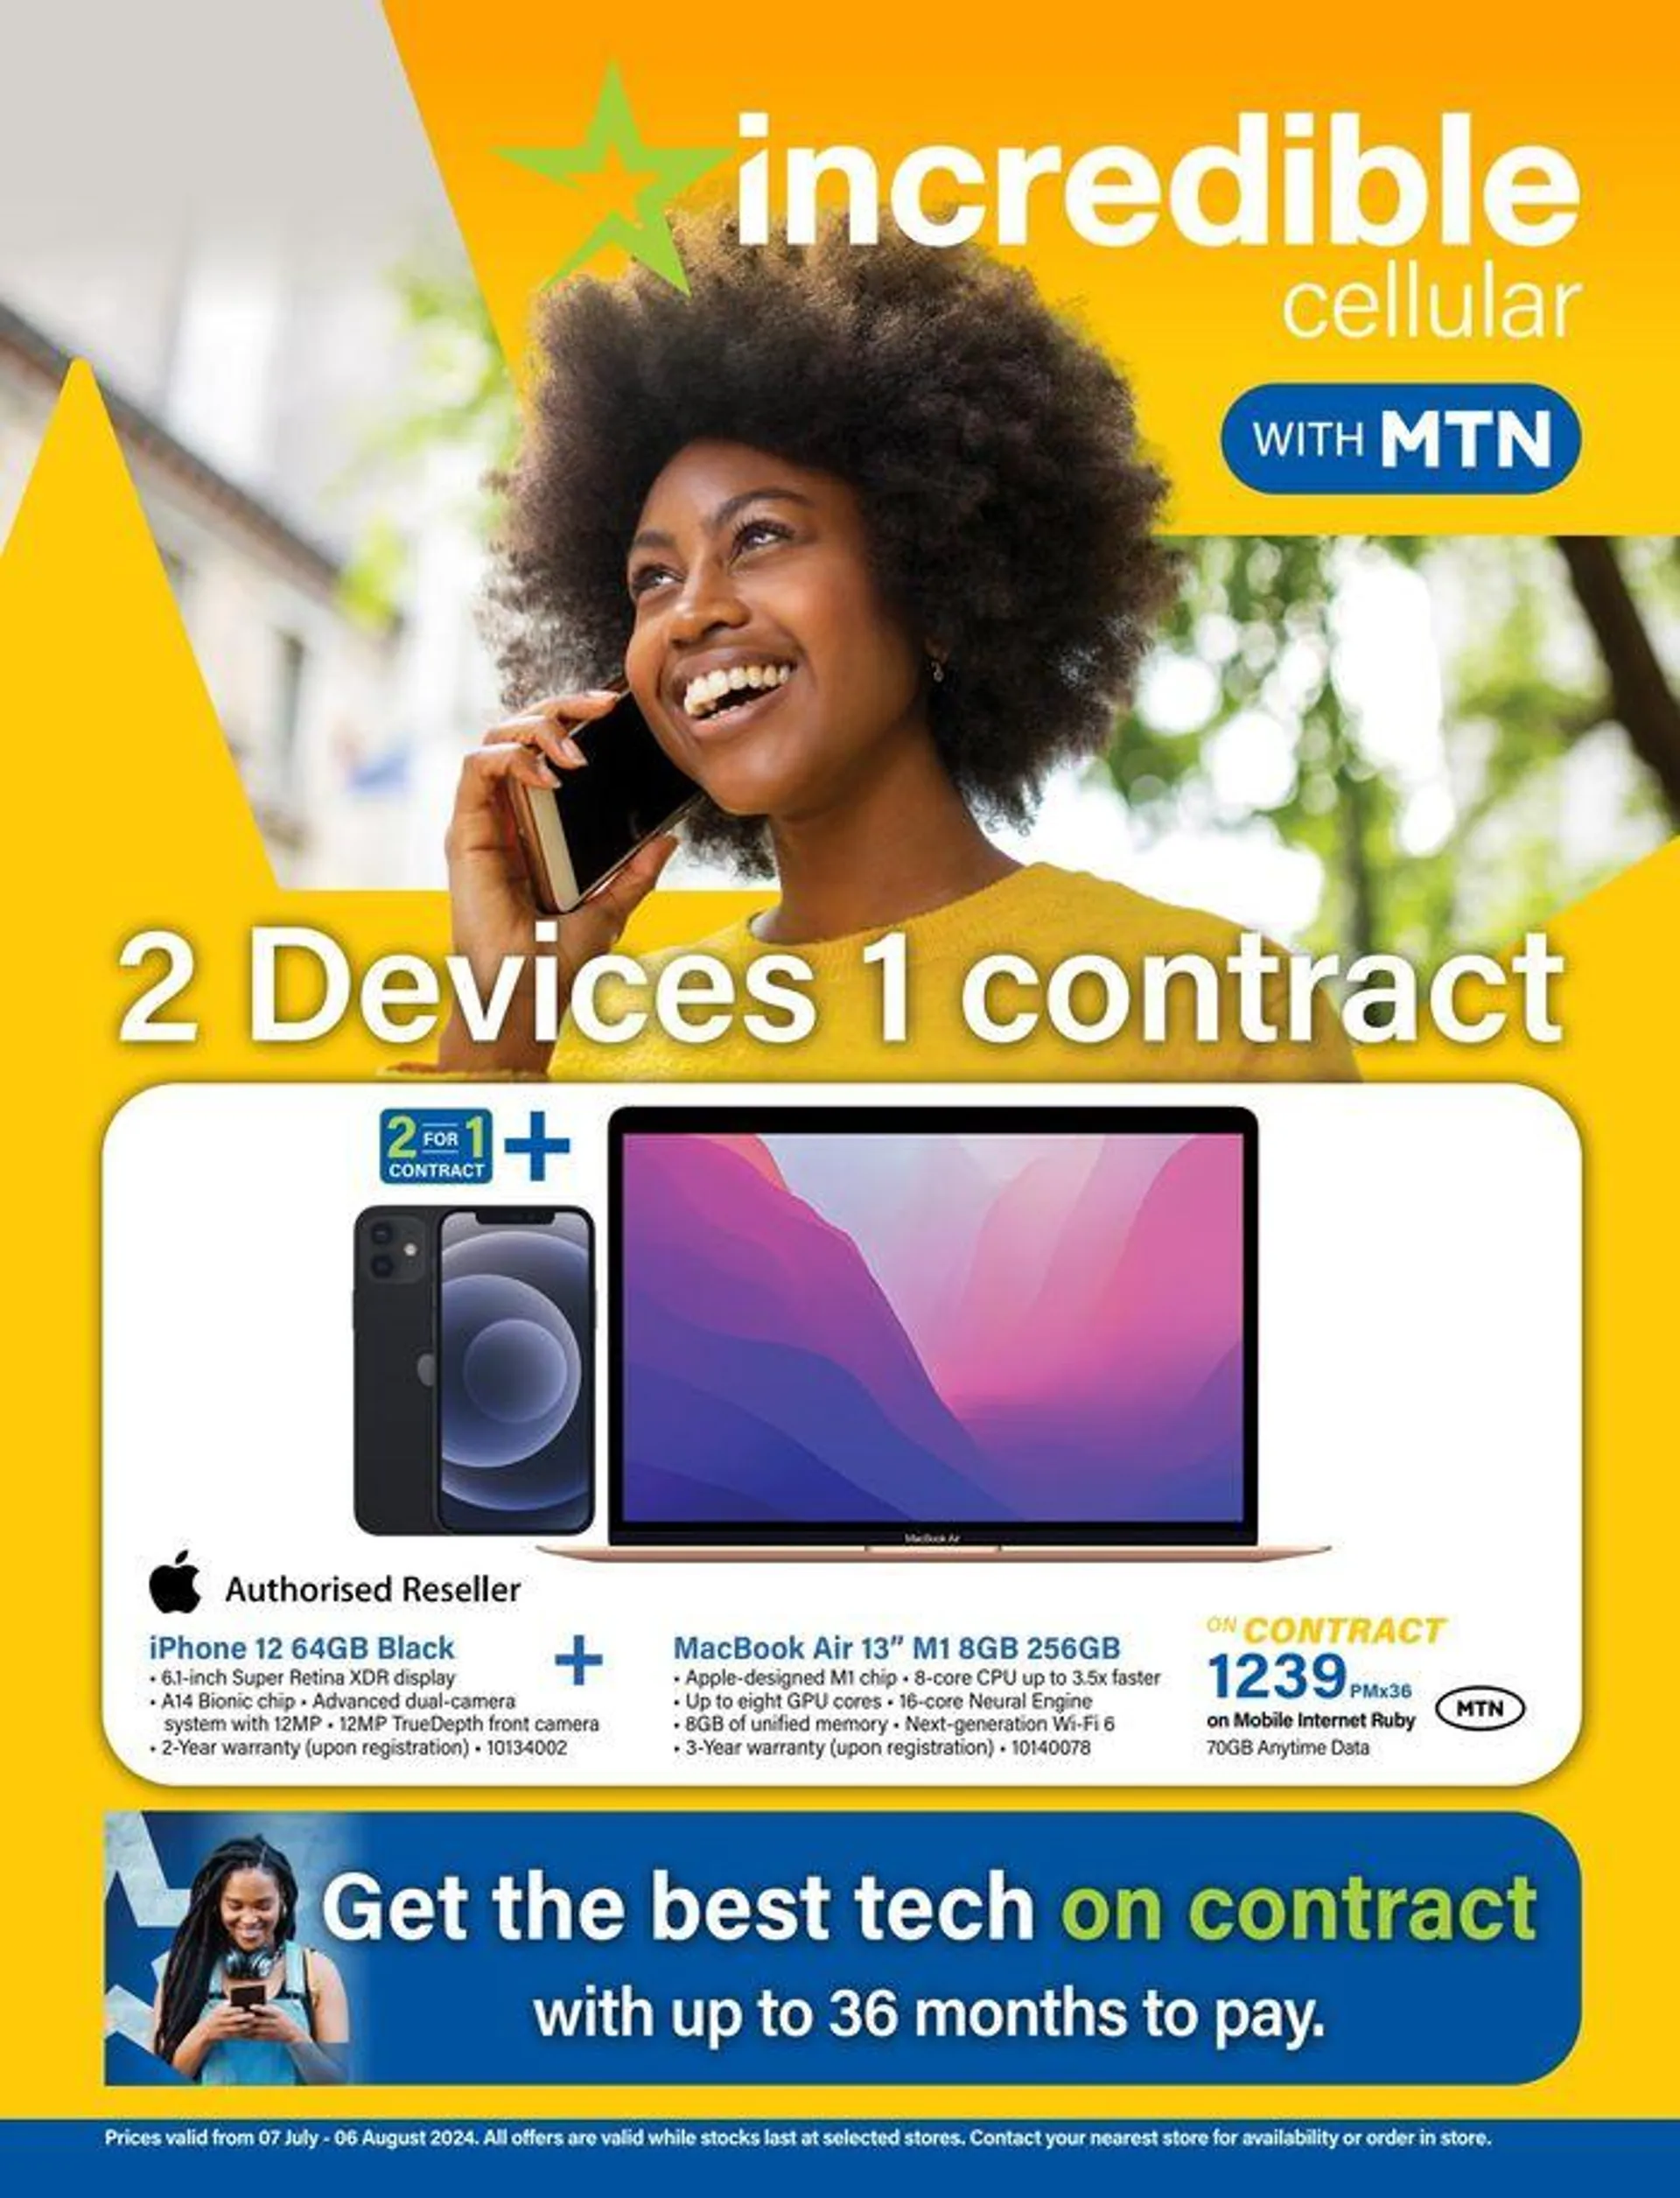  Tech On Contract - MTN - 1